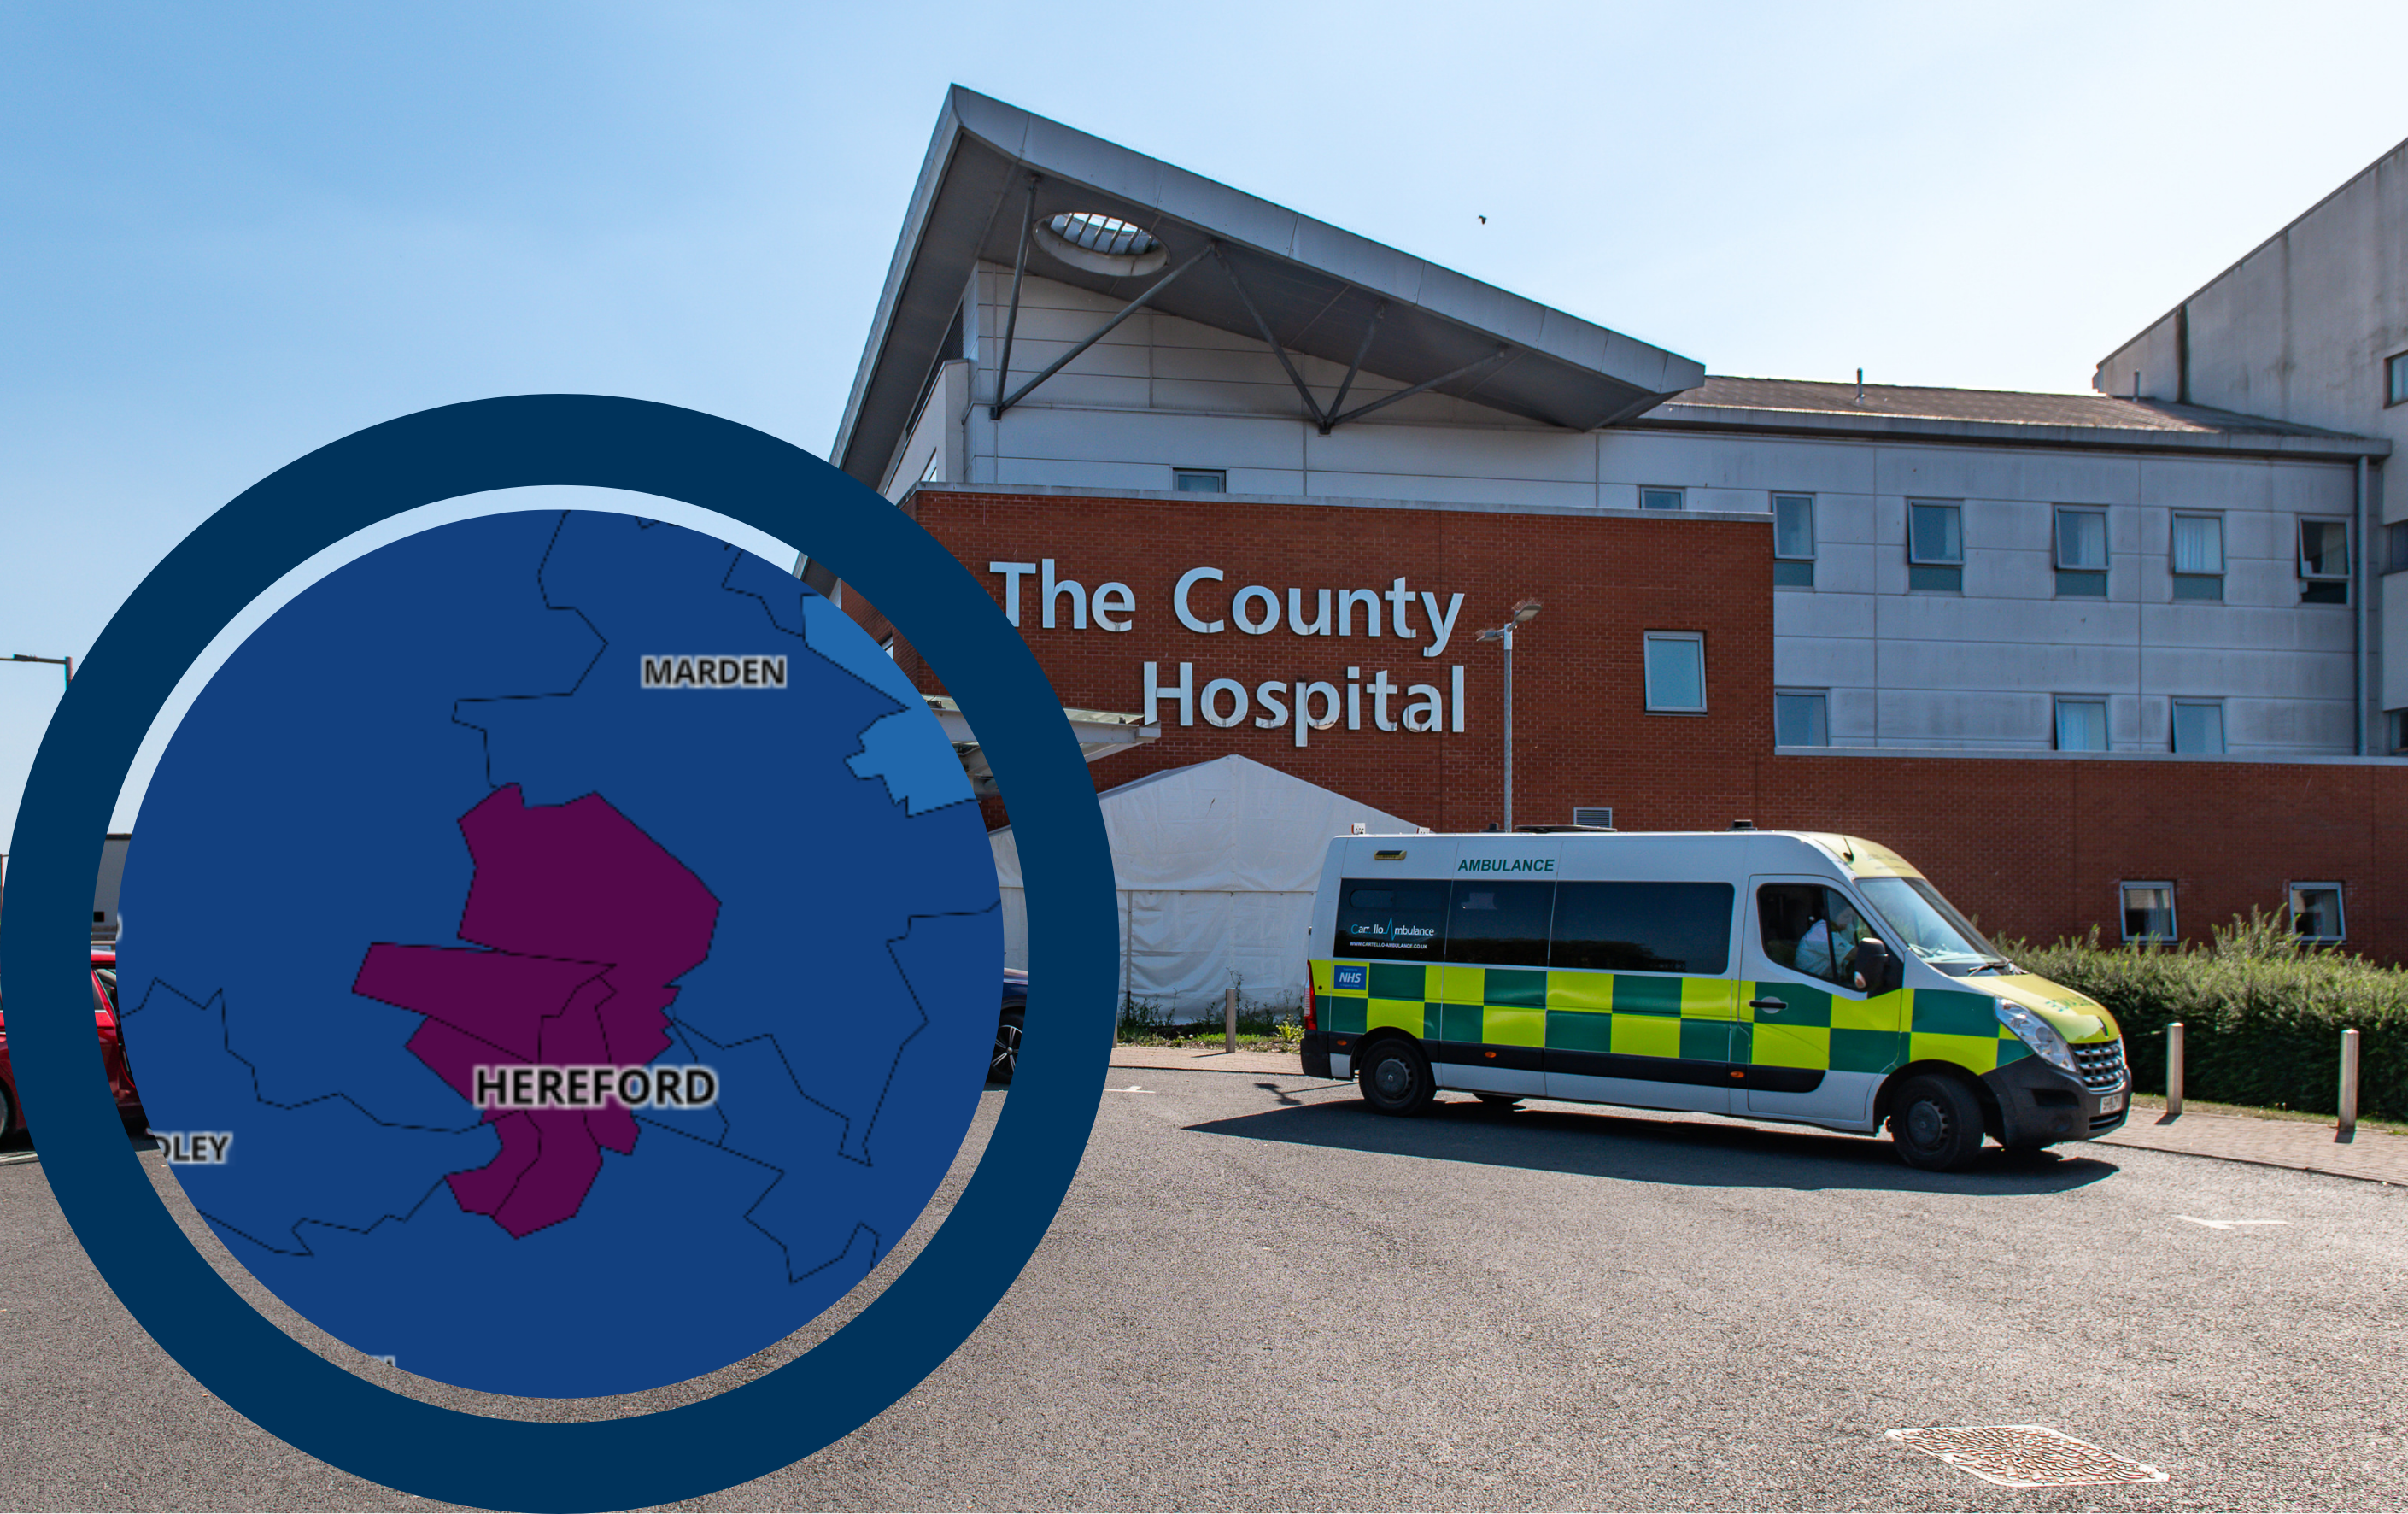 NEWS | COVID-19 infection rate continues to rise in Herefordshire but hospital numbers remain steady